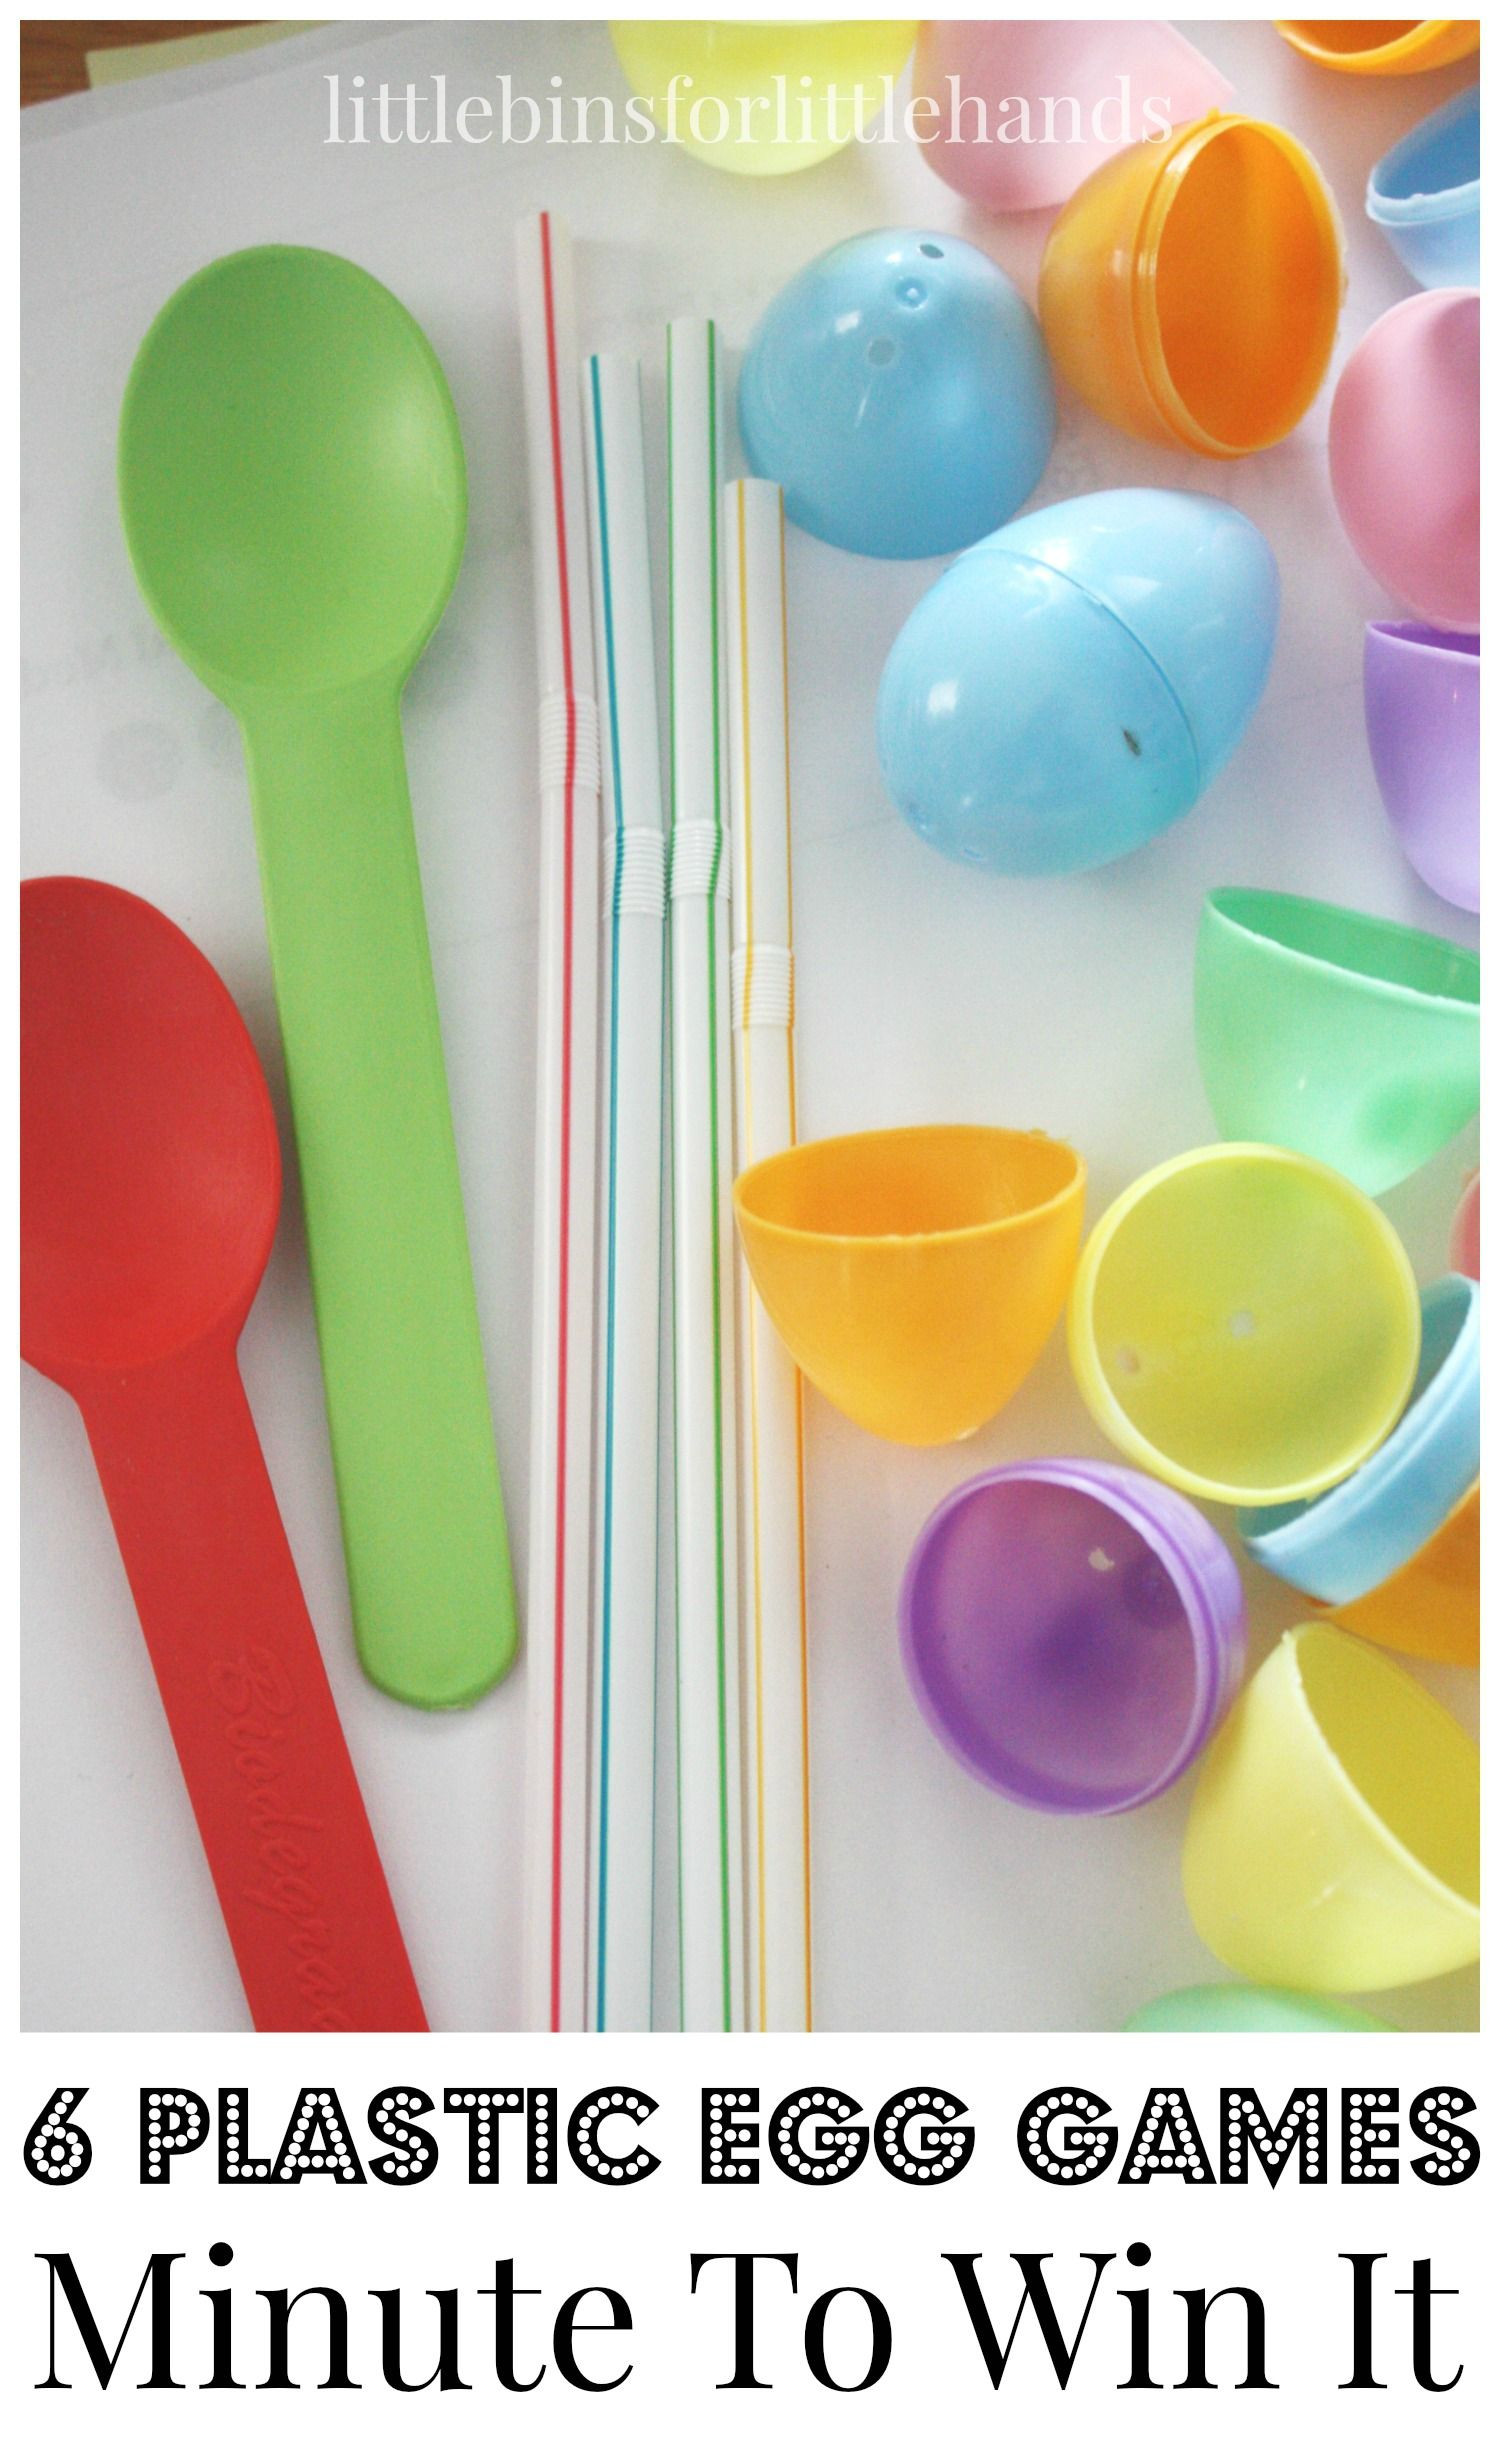 Easter Party Ideas For Work
 The 25 best Easter egg hunt games ideas on Pinterest